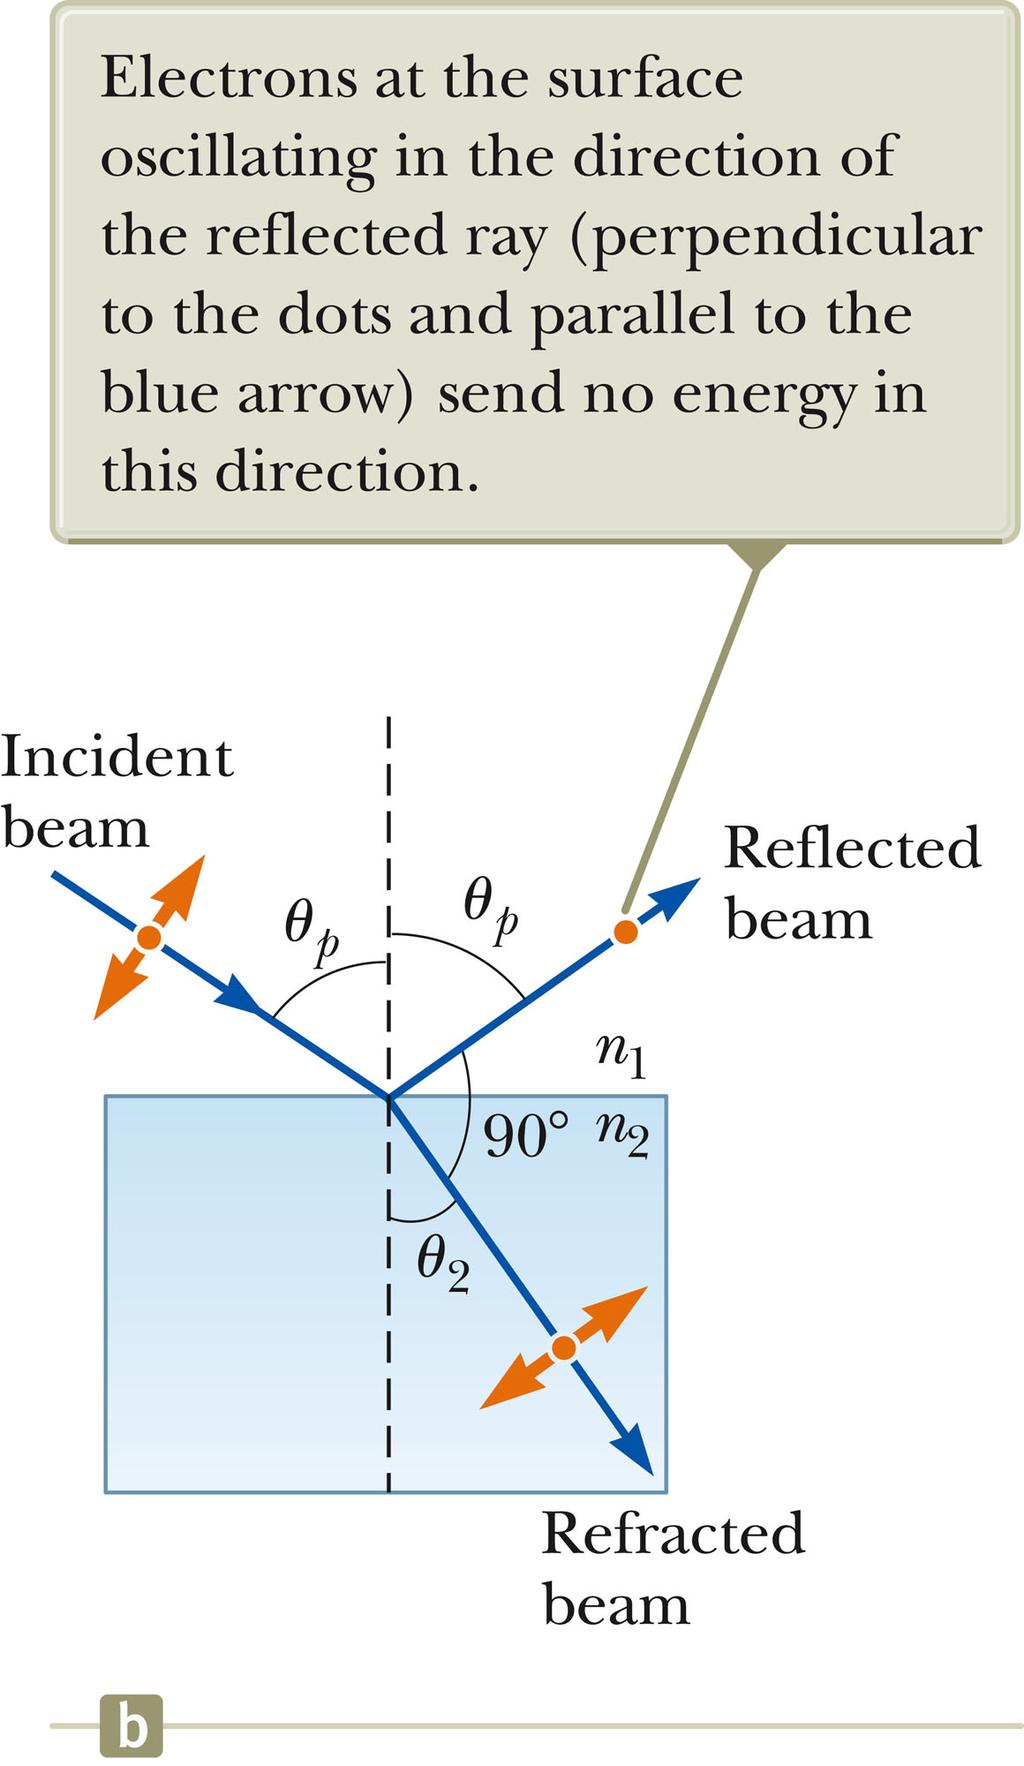 Brewster s law relates the polarizing angle to the index of refraction for the material. θ p may also be called Brewster s angle. Unpolarized light is incident on a reflecting surface.